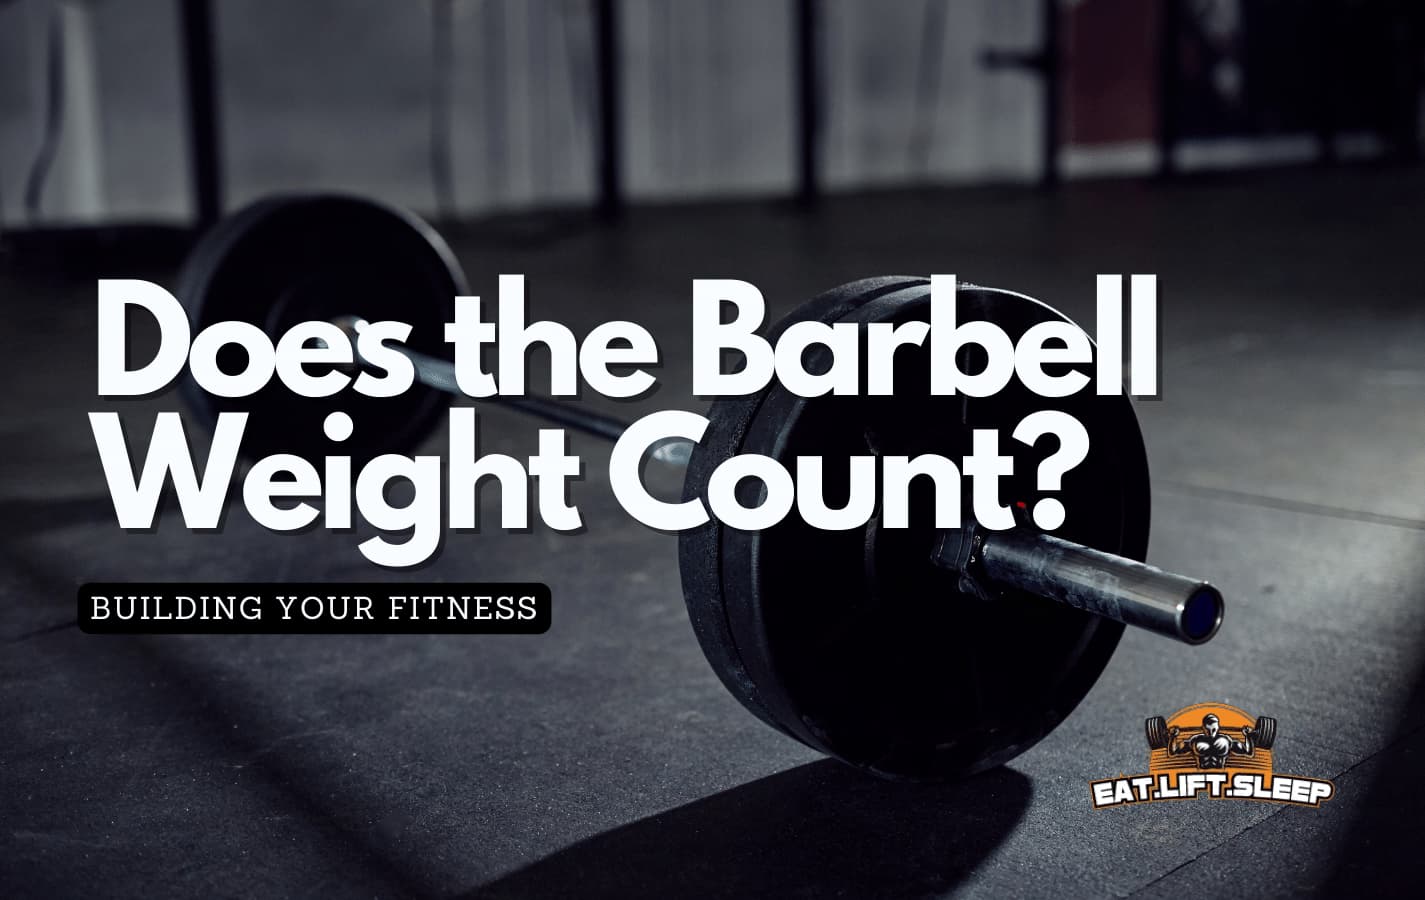 Barbell sitting on the floor at a CrossFit gym